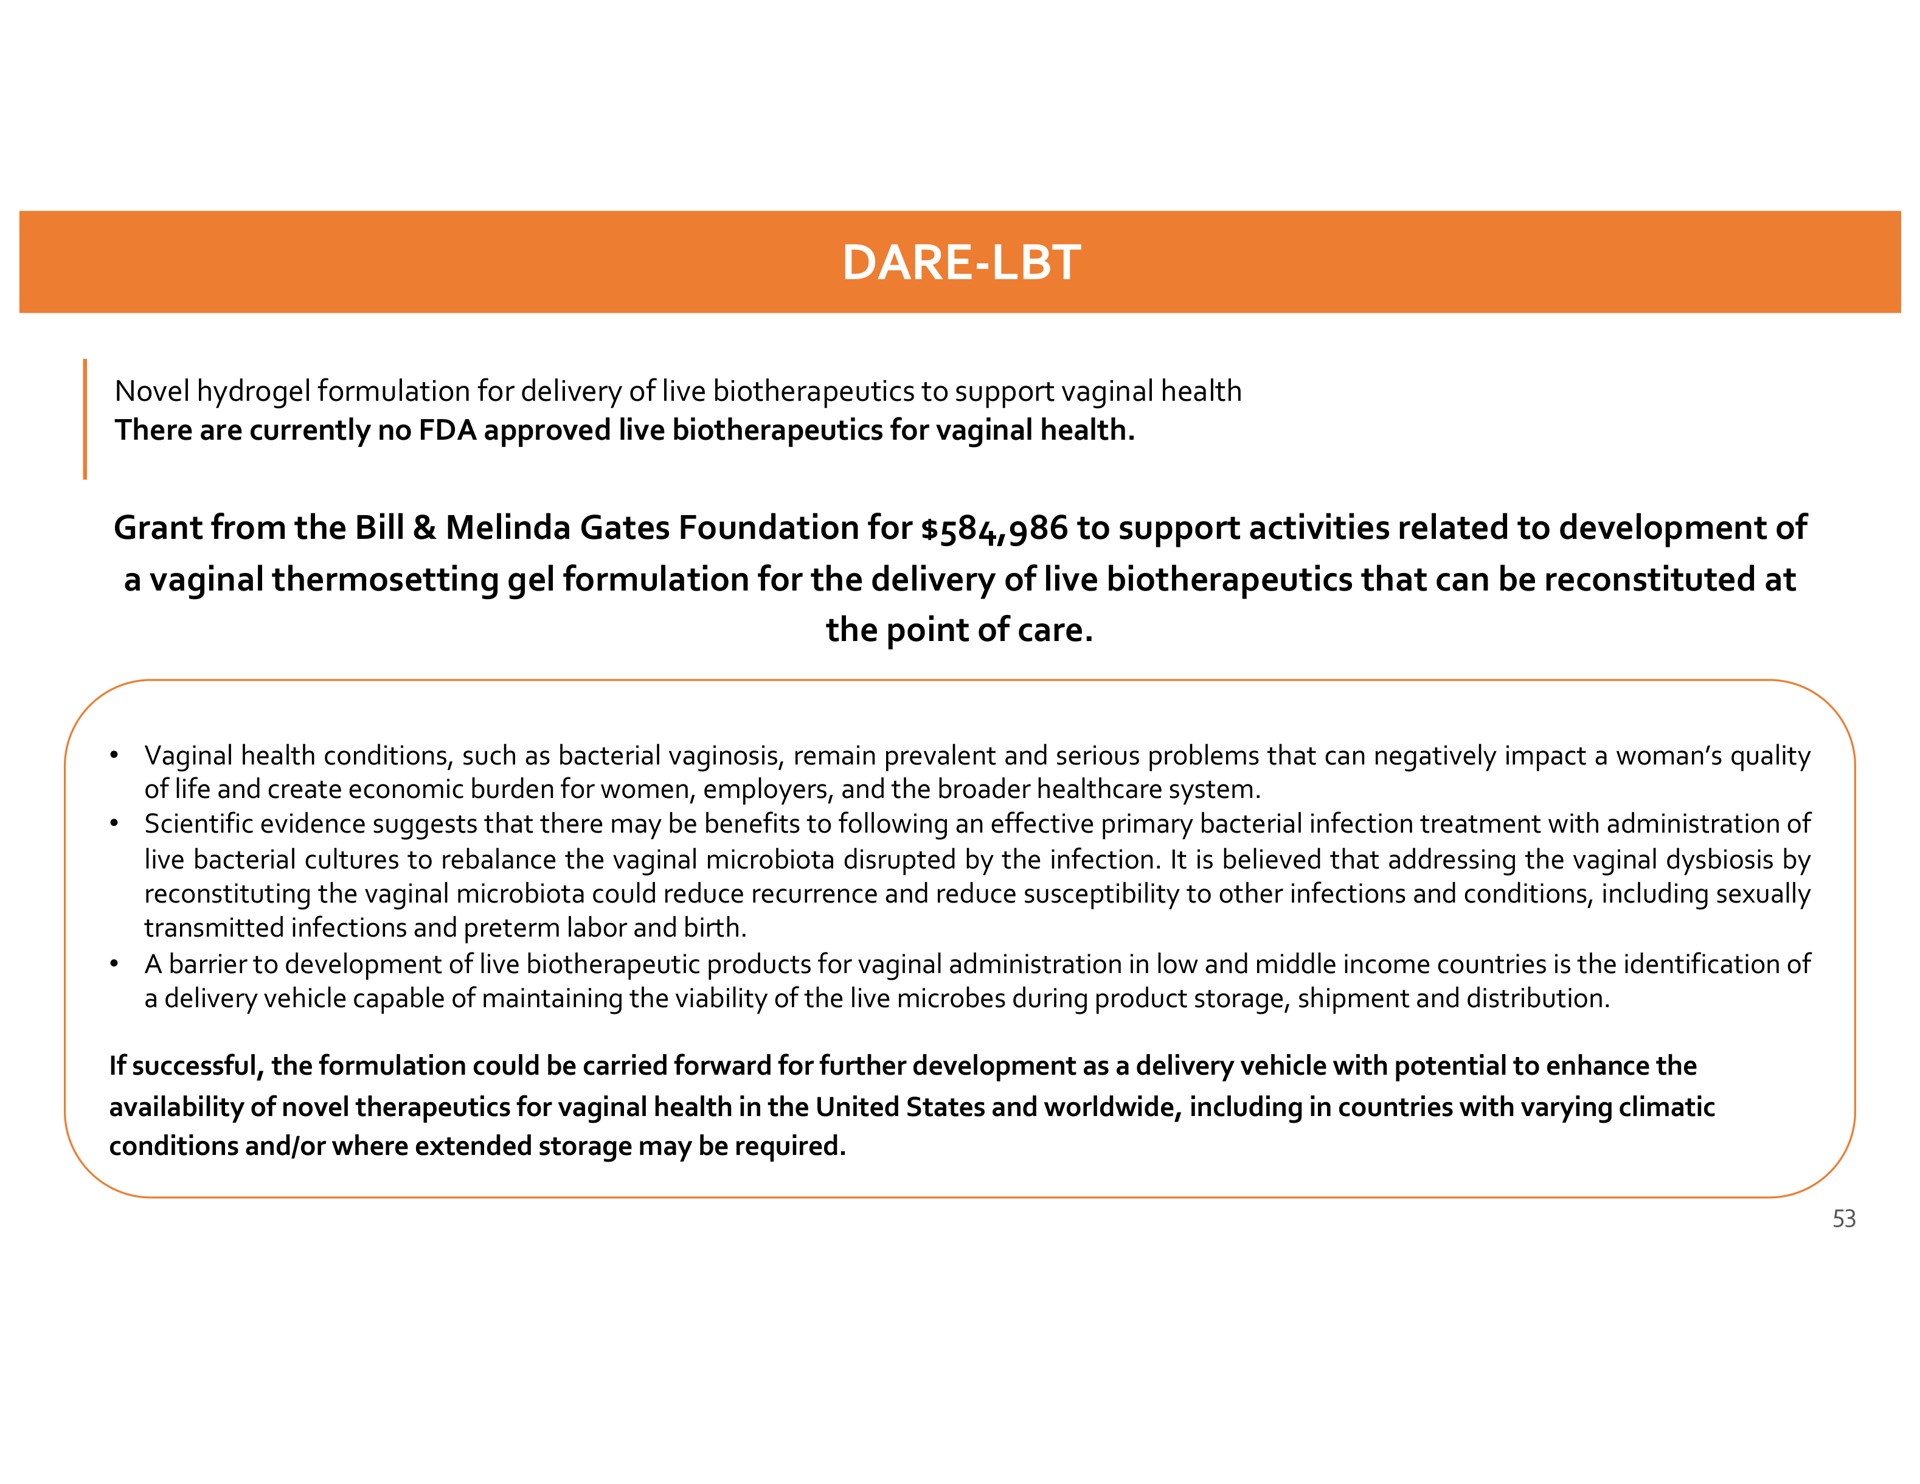 dare grant from the bill gates foundation for to support activities related to development of a vaginal thermosetting gel formulation for the delivery of live that can be reconstituted at the point of care | Dare Bioscience